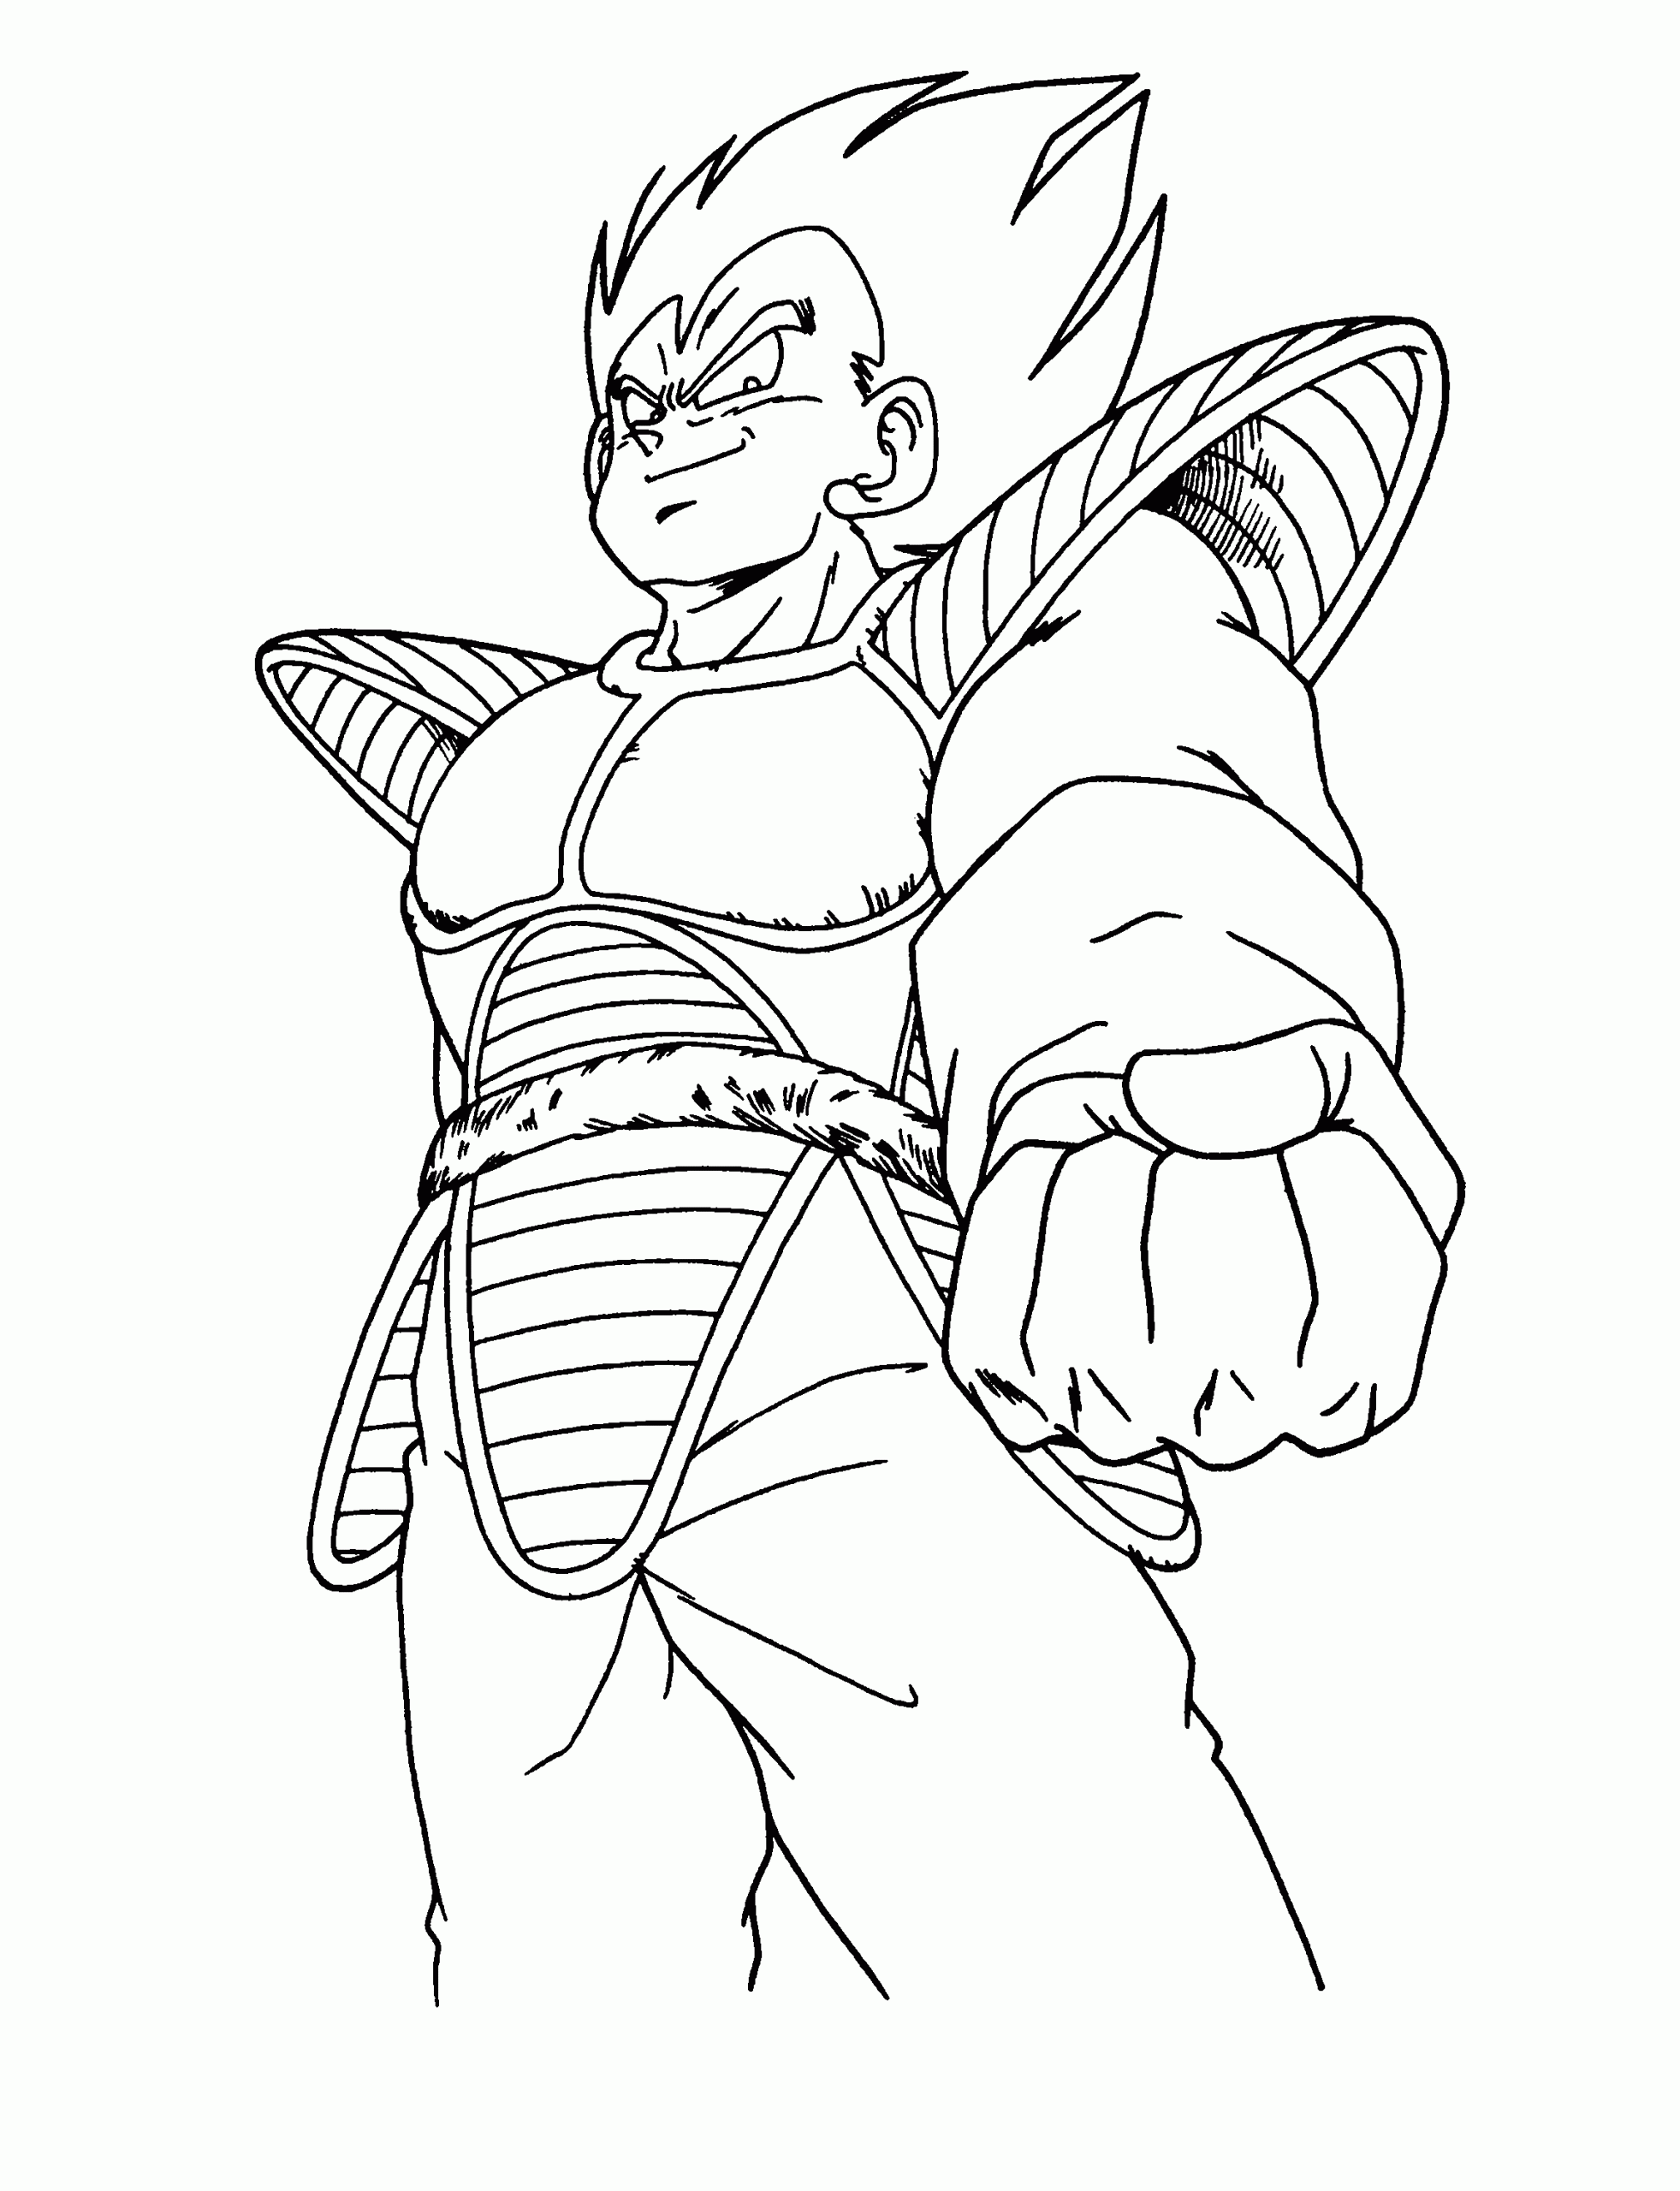 Majin Vegeta Coloring Pages 2020 Coloring Page Guide | Porn Sex Picture